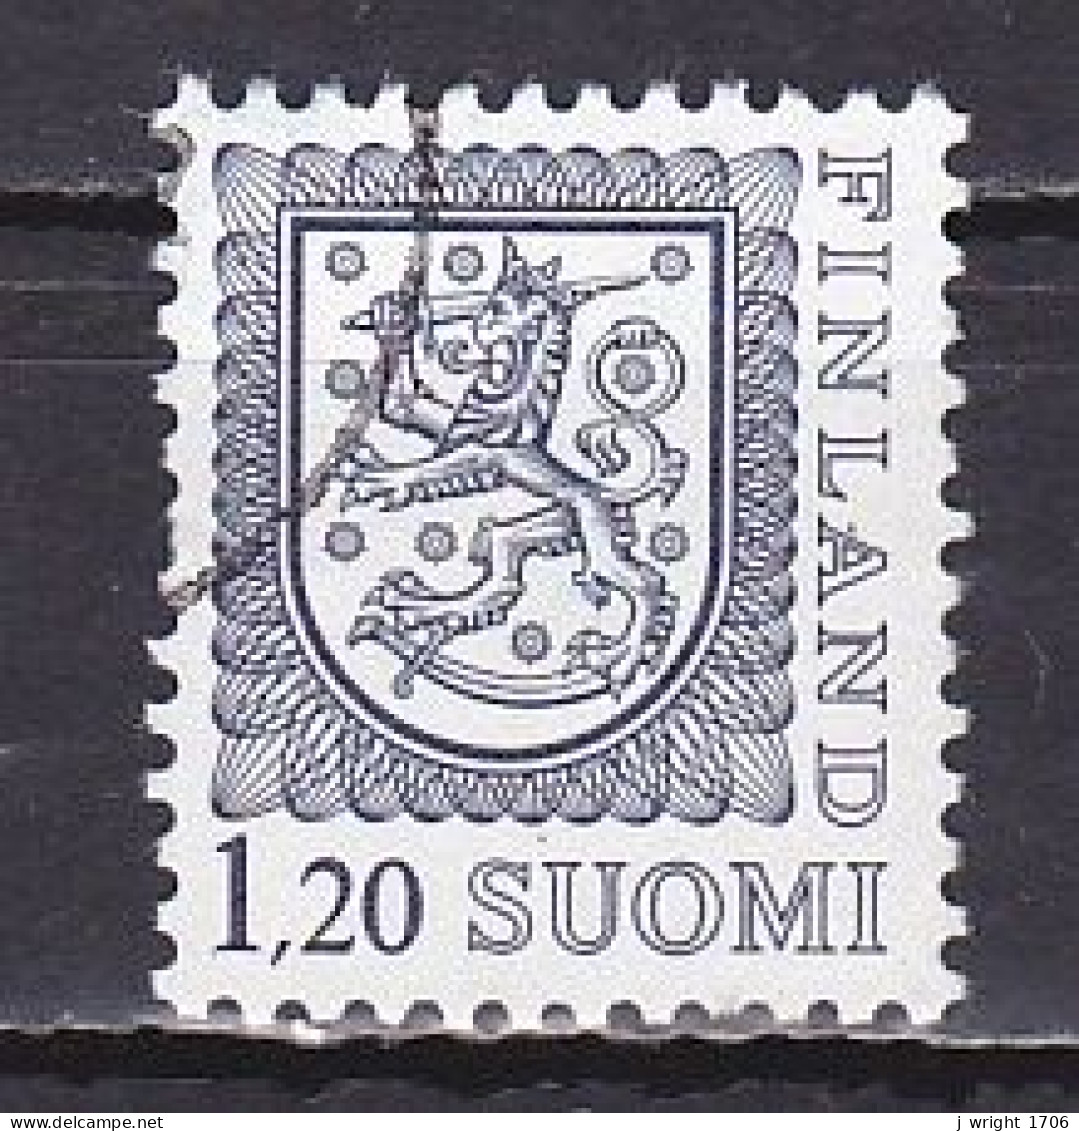 Finland, 1979, Coat Of Arms, 1.20mk, USED - Oblitérés